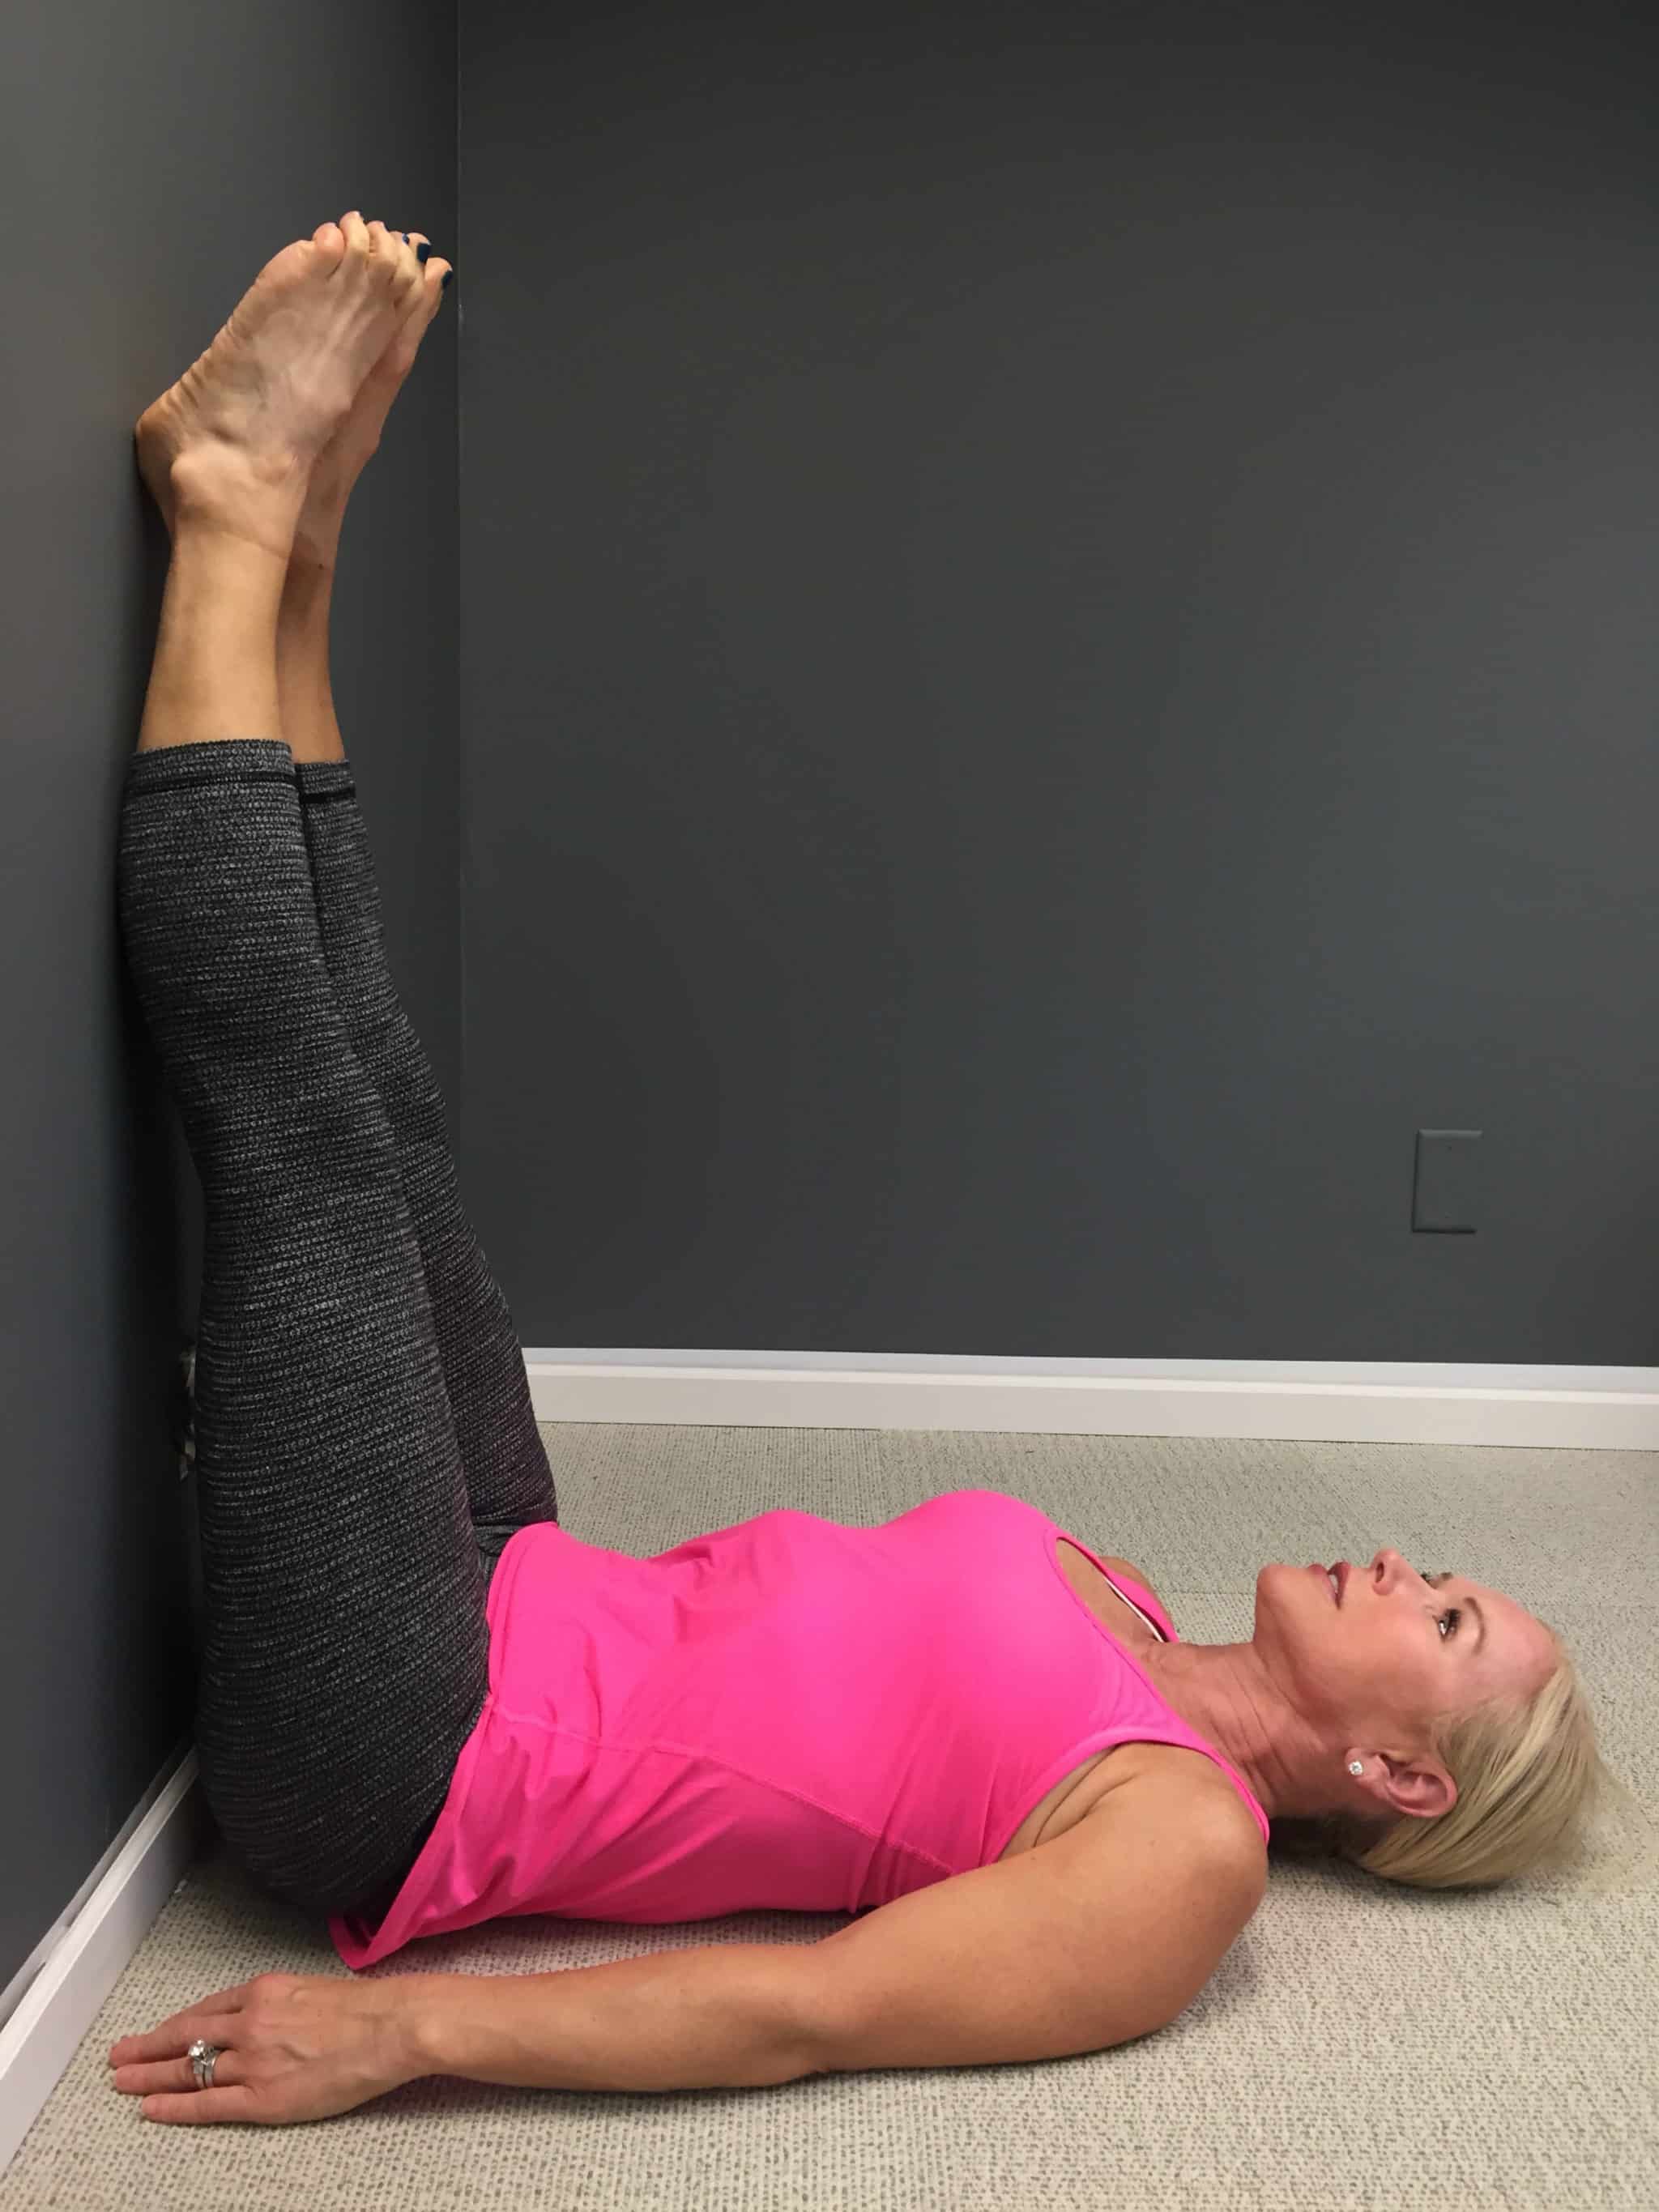 Learn how inversions like Legs Up the Wall pose help ease anxiety.